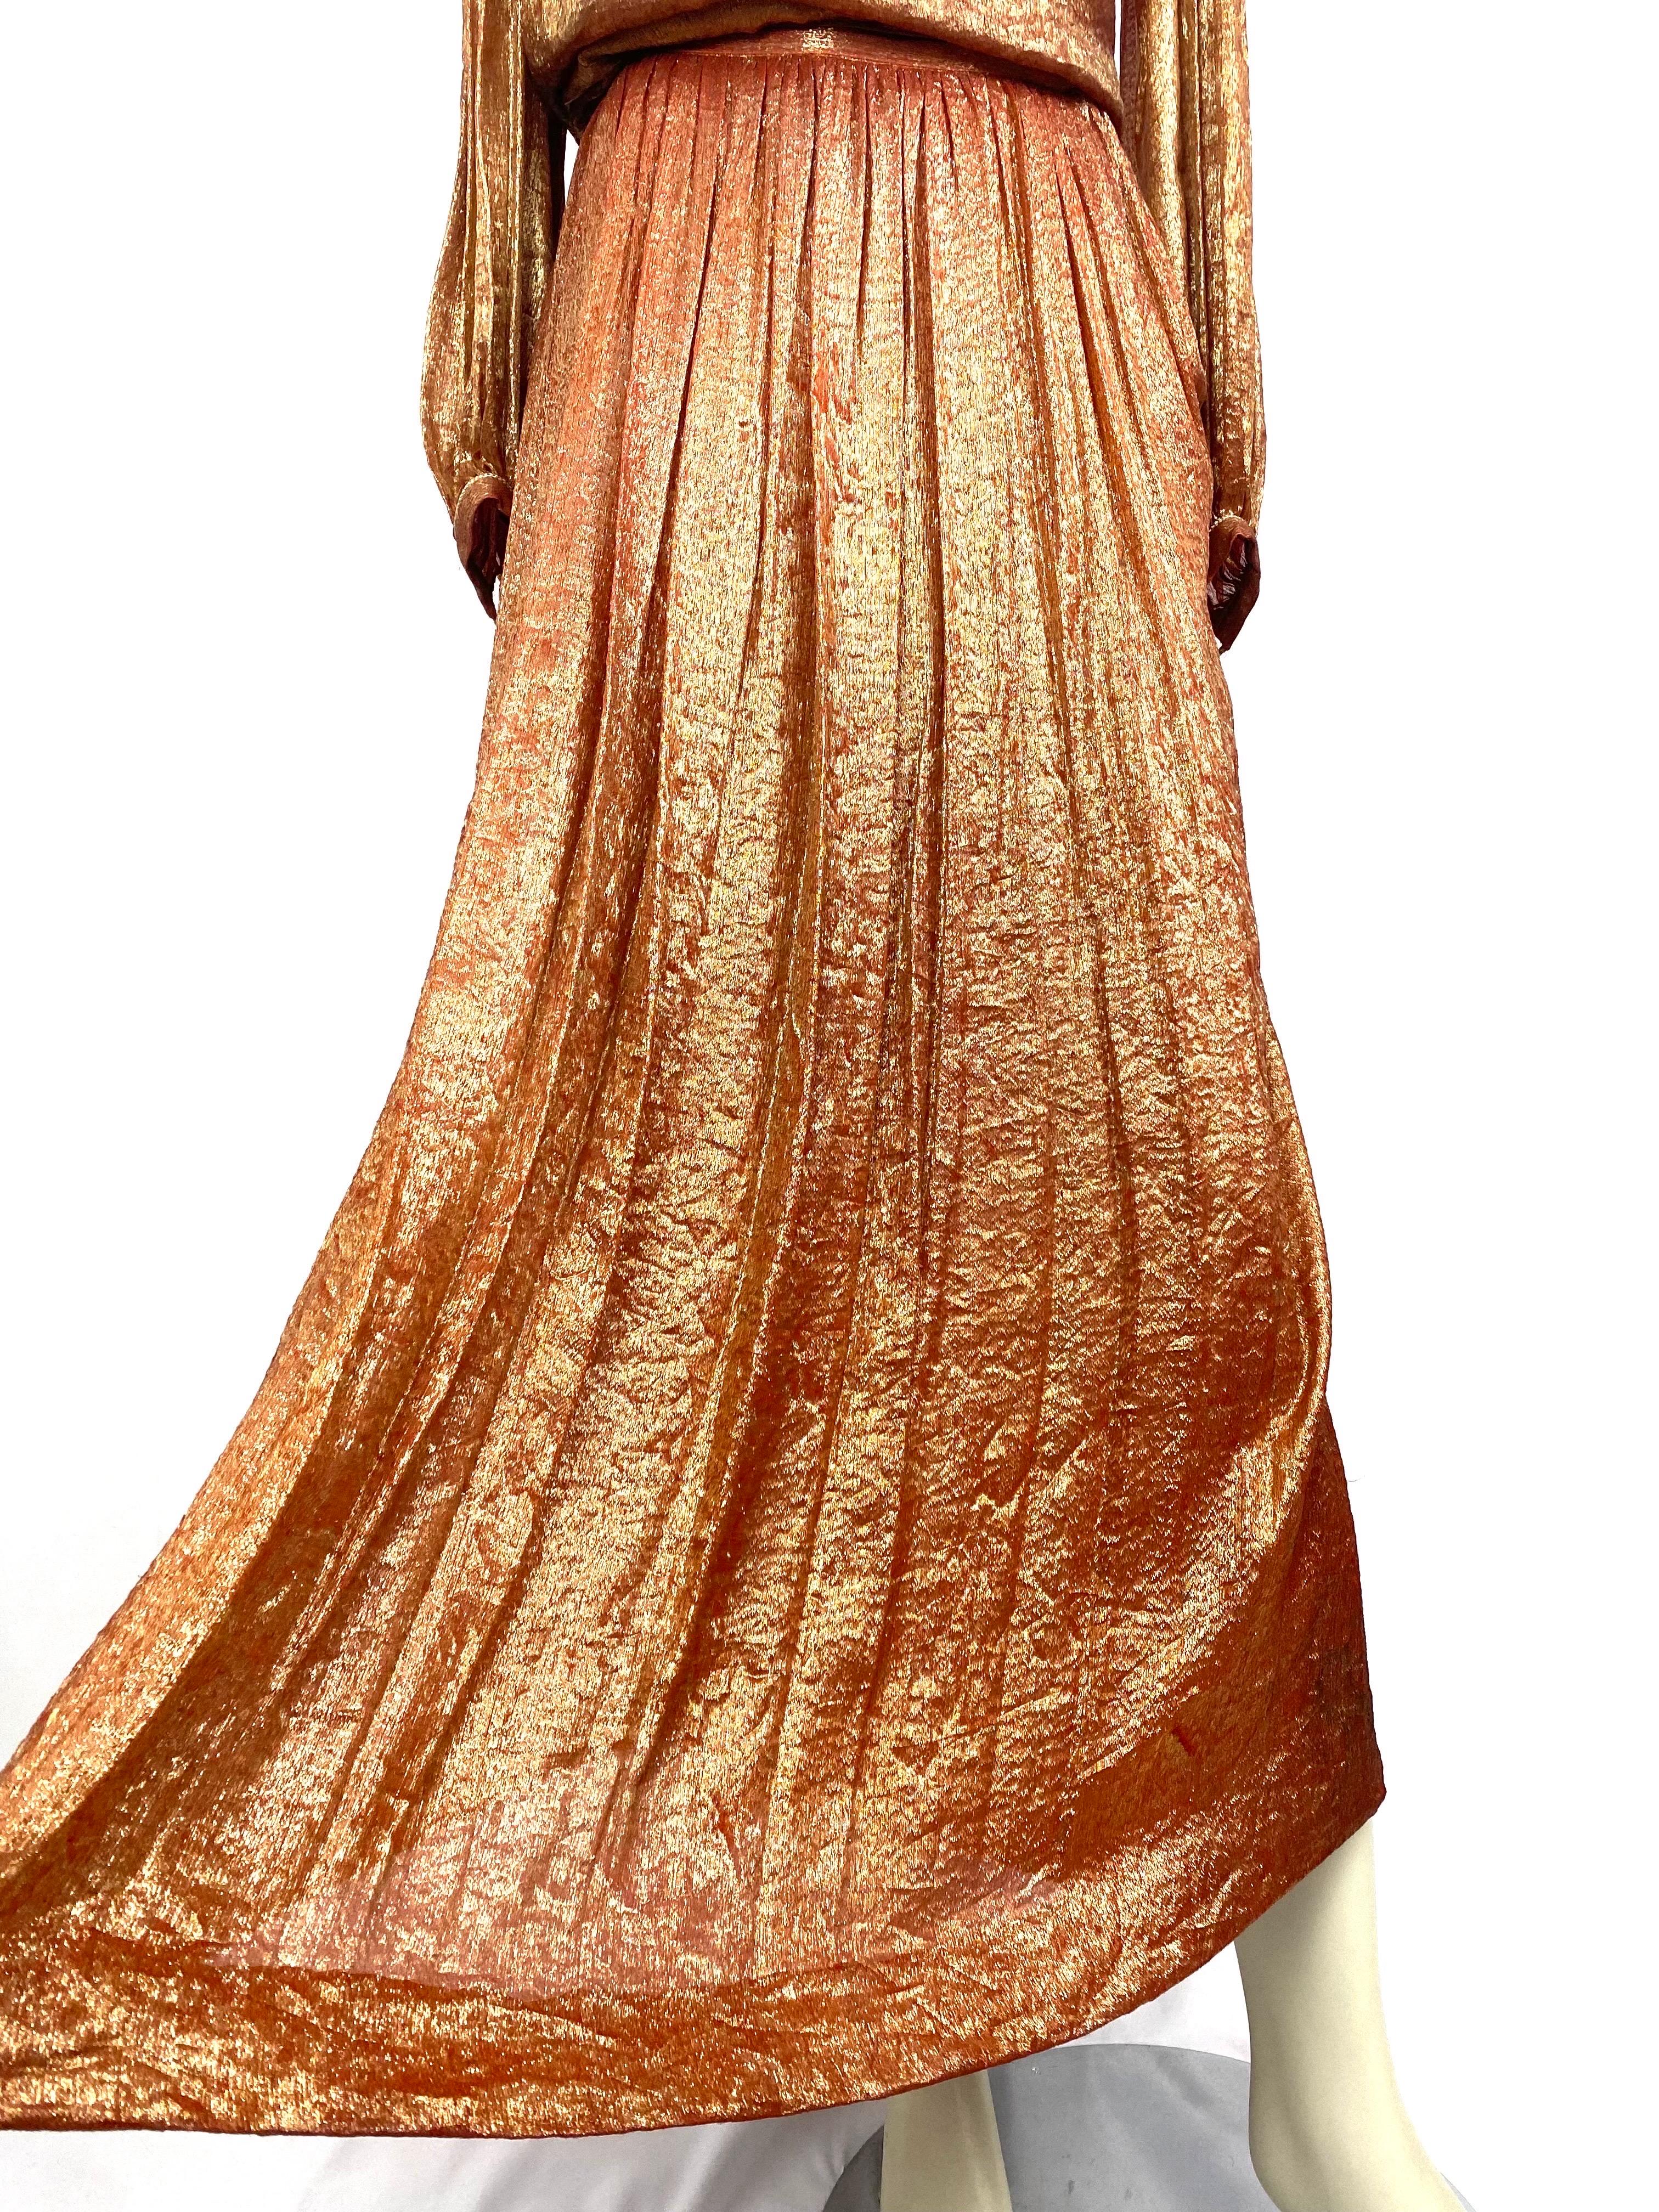 Women's Vintage set from the 1970s by Yves Saint Laurent in gold and bronze silk lamé